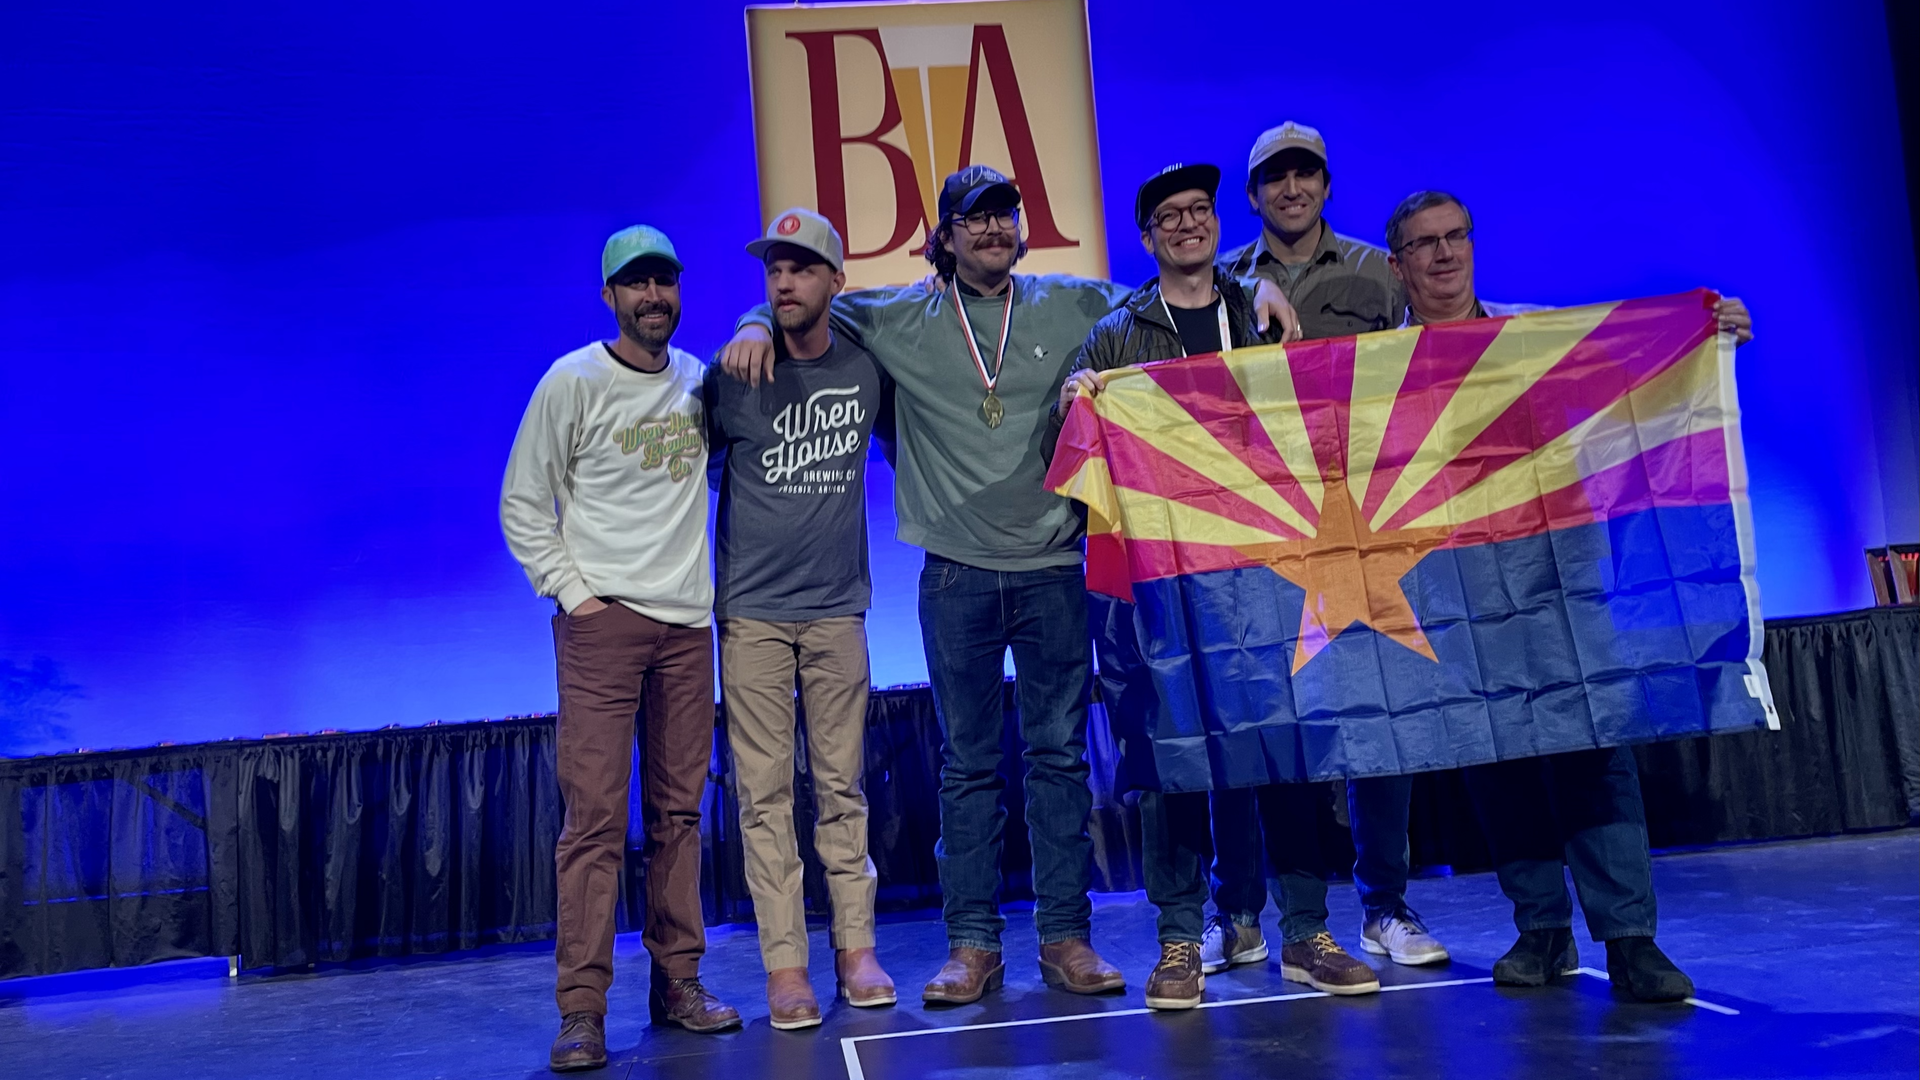 A group of men on stage holding an Arizona flag.